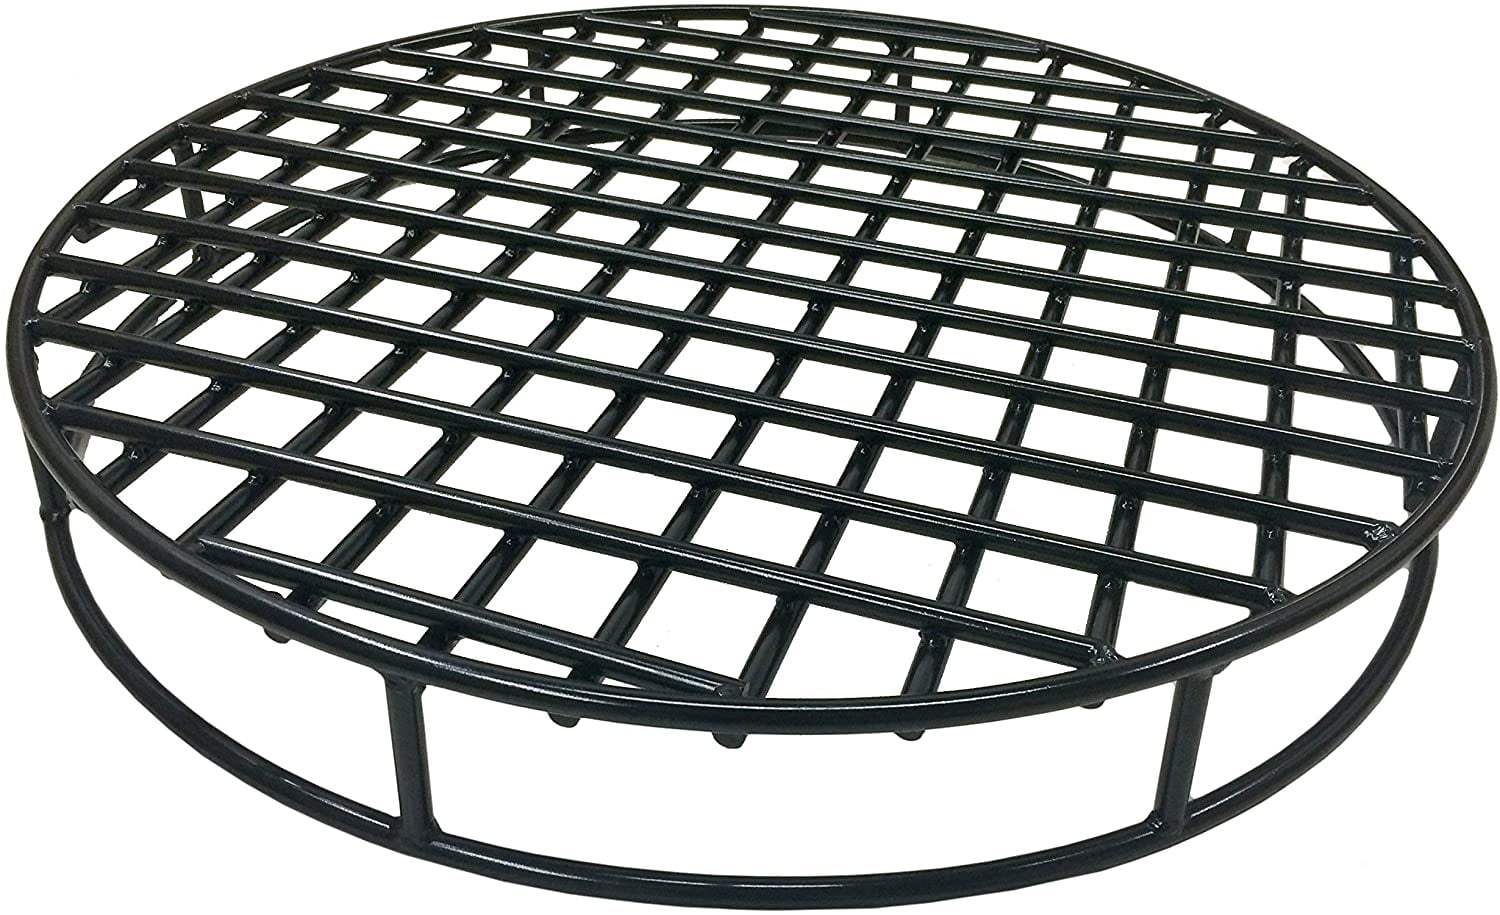 Walden Backyards Fire Pit Grate, Square Fire Pit Grate